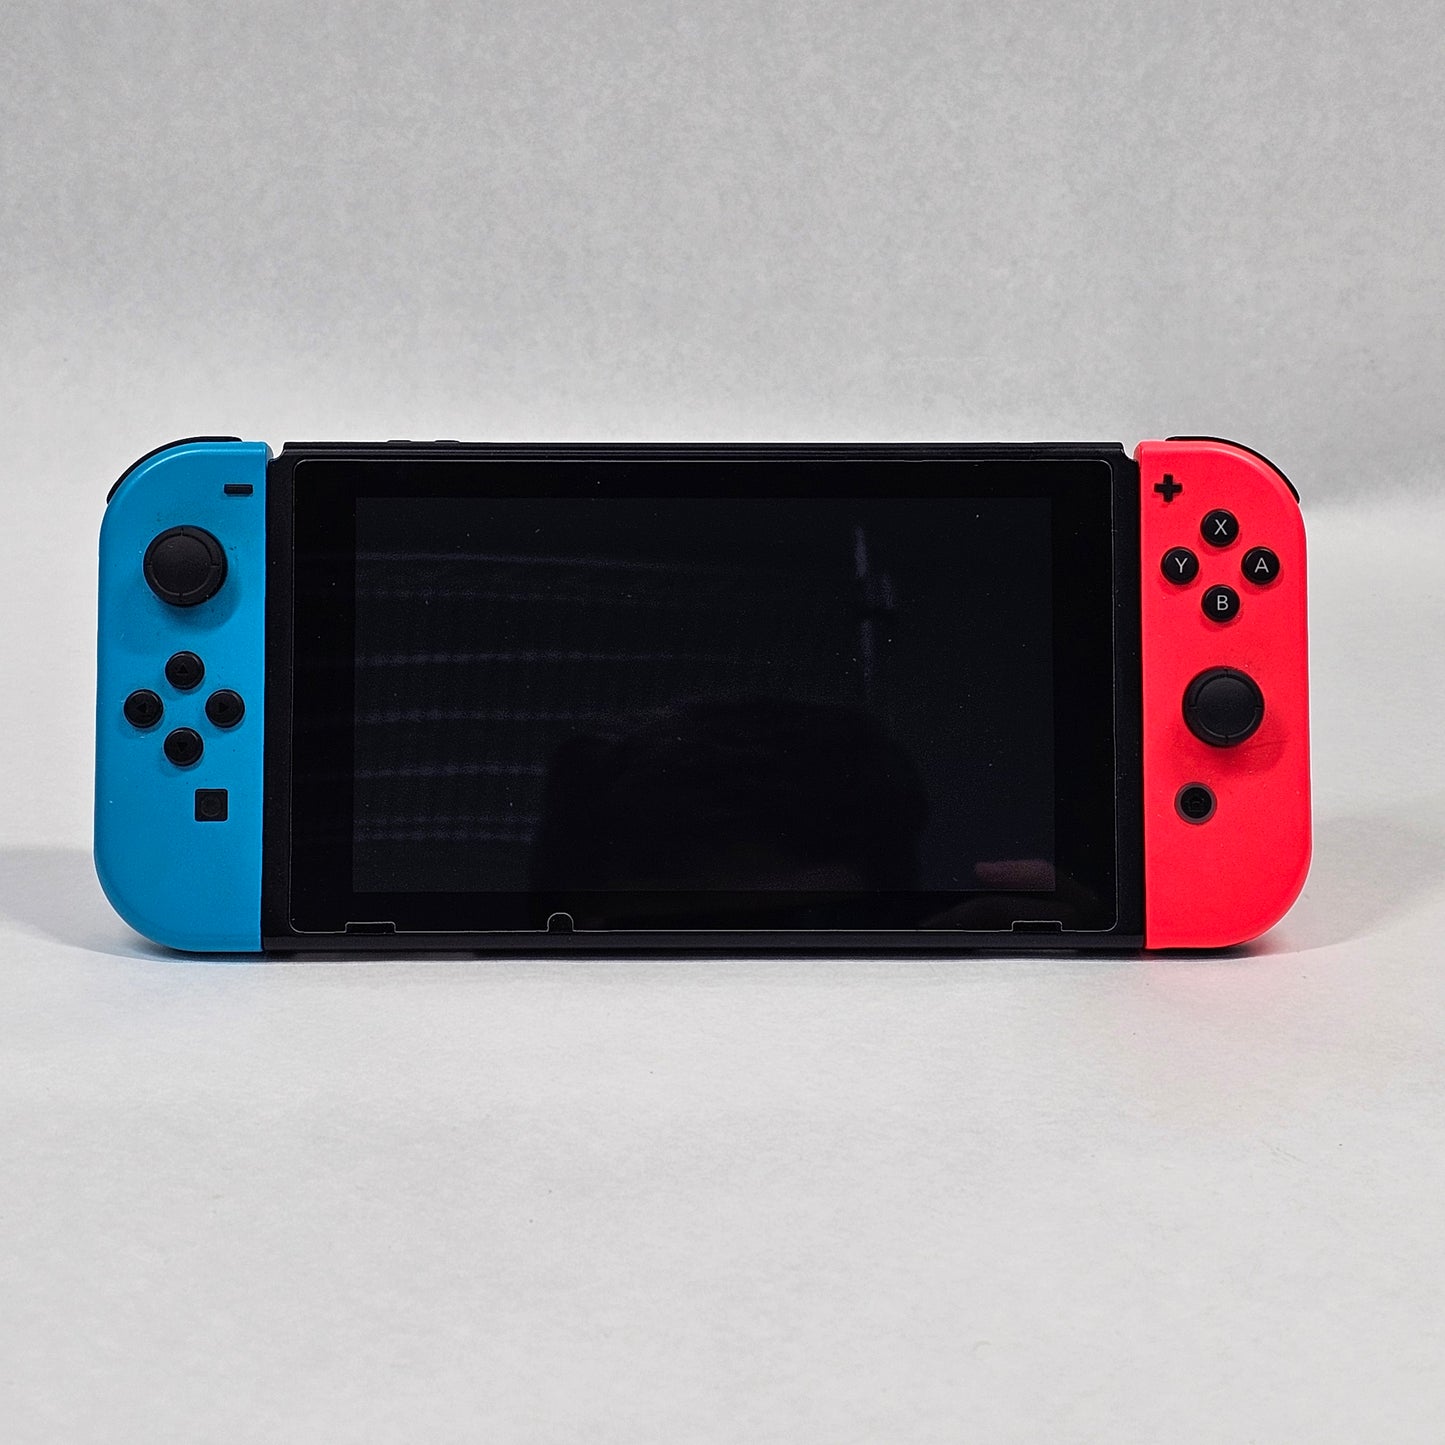 Nintendo Switch v1 Video Game Console HAC-001 Red/Blue